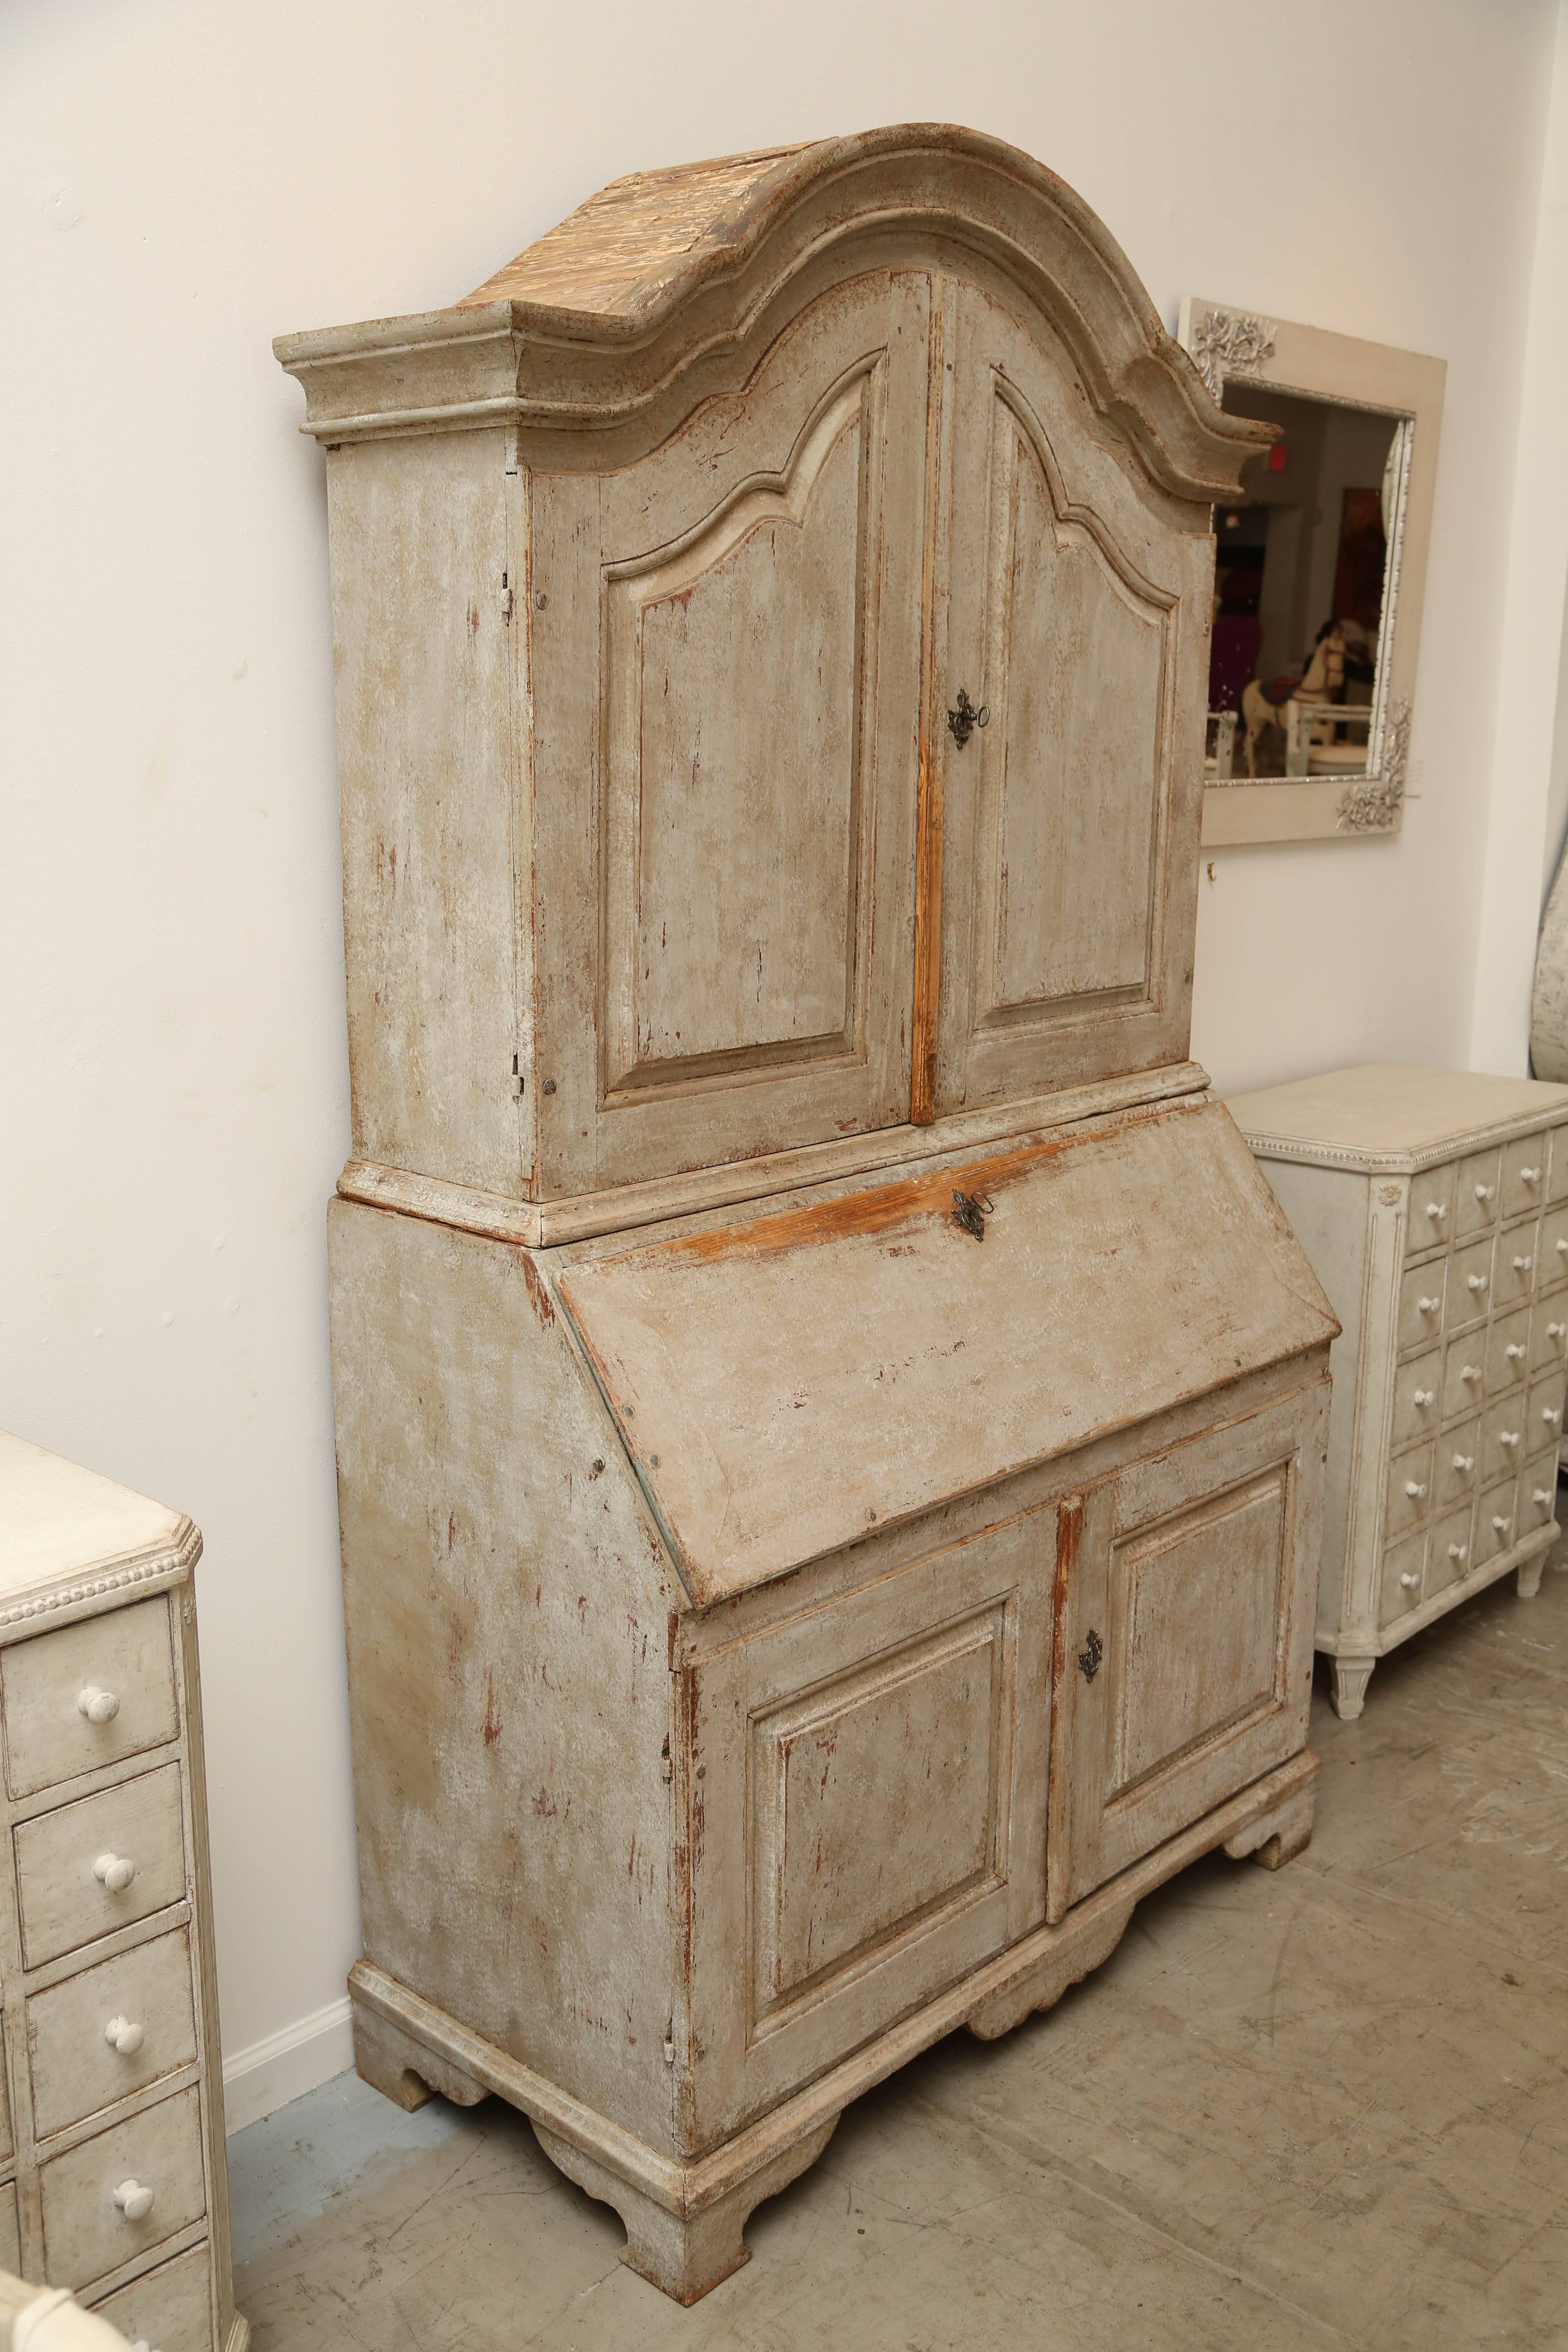 This Baroque secretary has a lovely distressed painted finish in greenish beige exterior and a greenish blue interior. 
The arched cornice starts at the top. Once the doors are opened, there's a curved shelf with spoon notches and three shelves